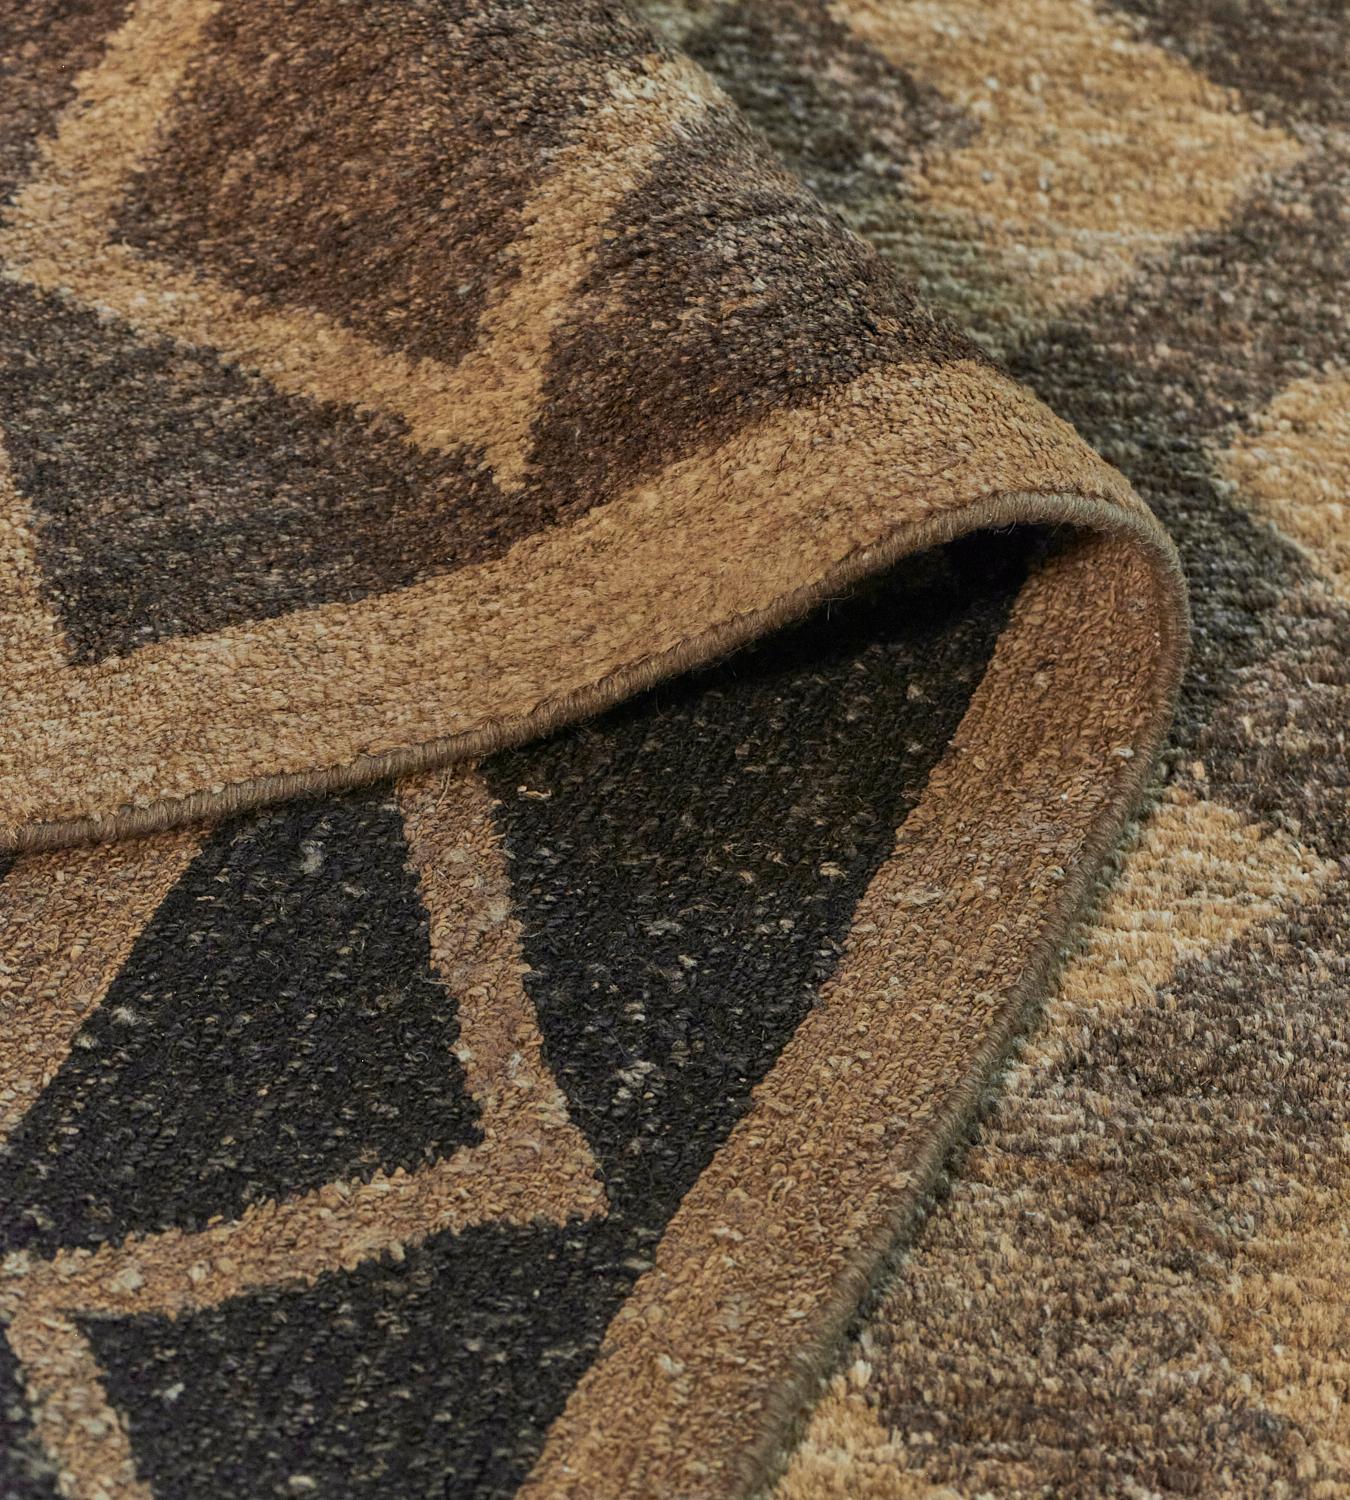 Part of the Mansour Modern collection, this hemp rug is handwoven by master weavers using the finest quality techniques and materials.